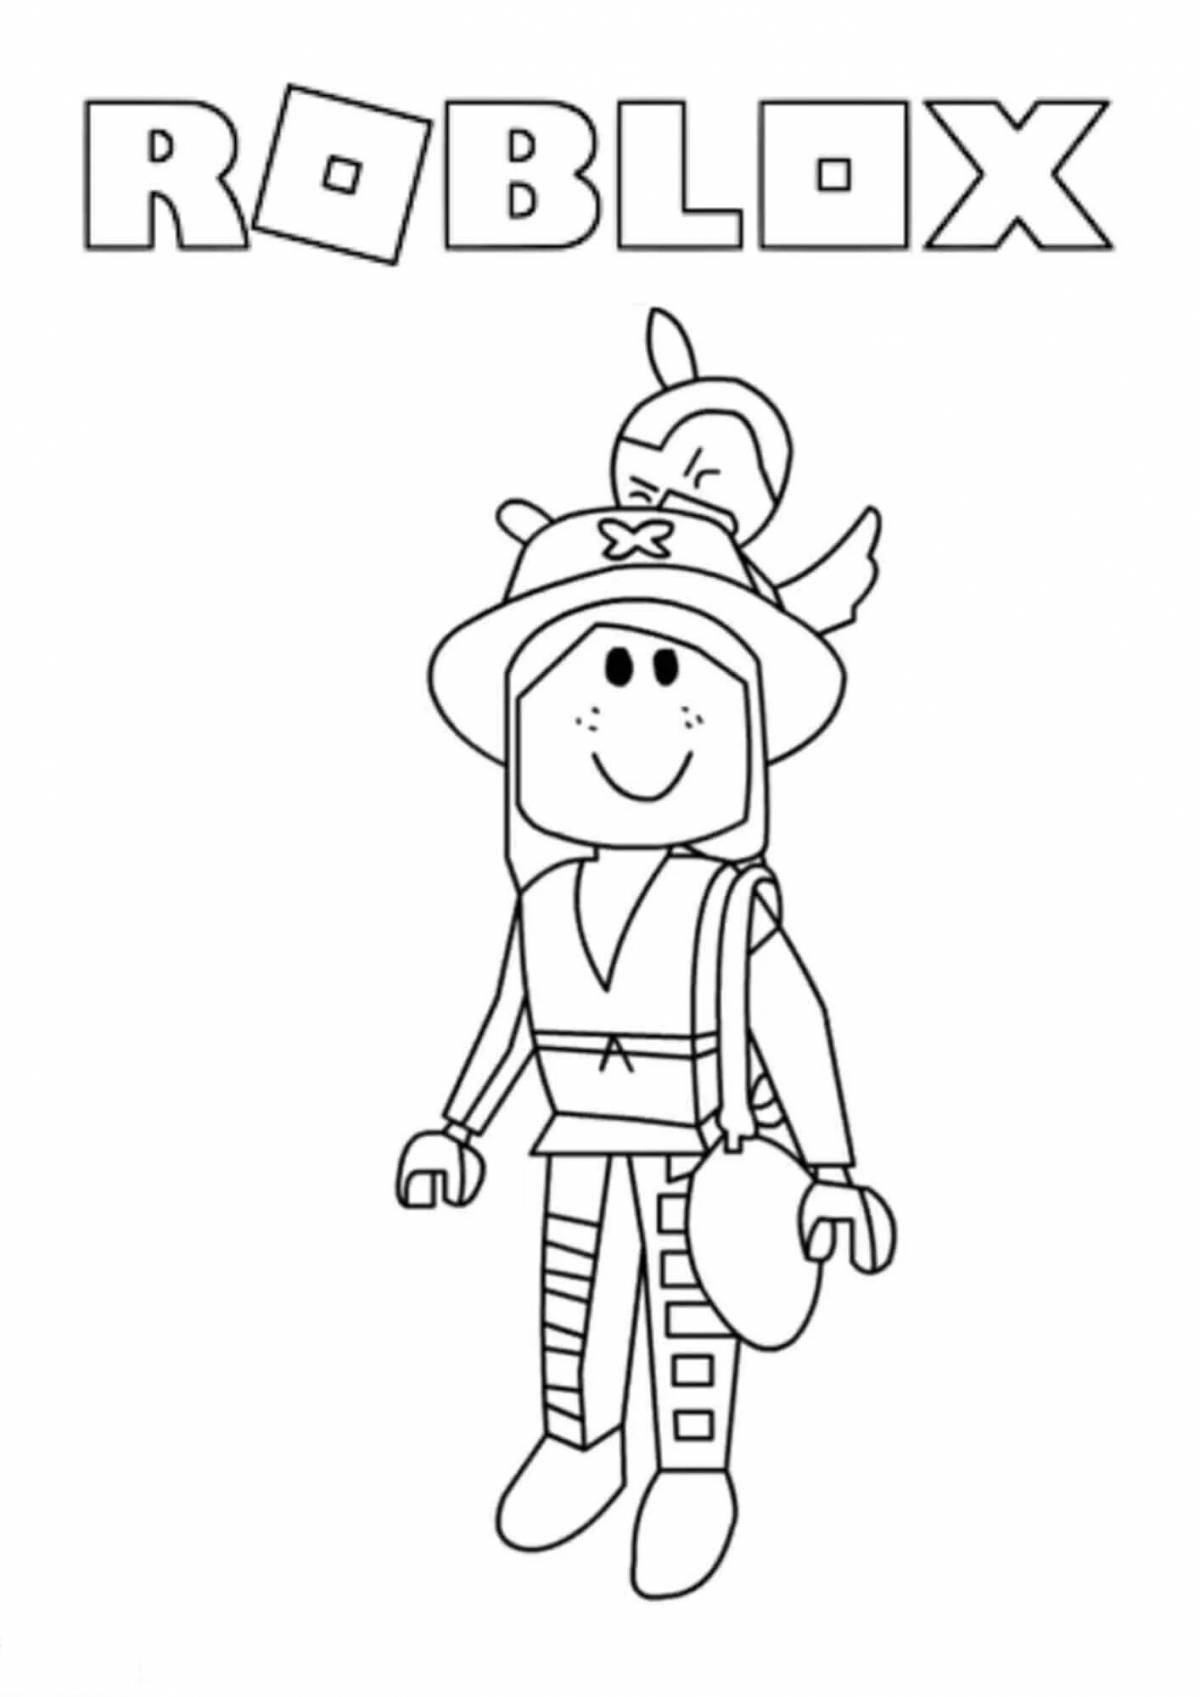 Roblox glowing face coloring page